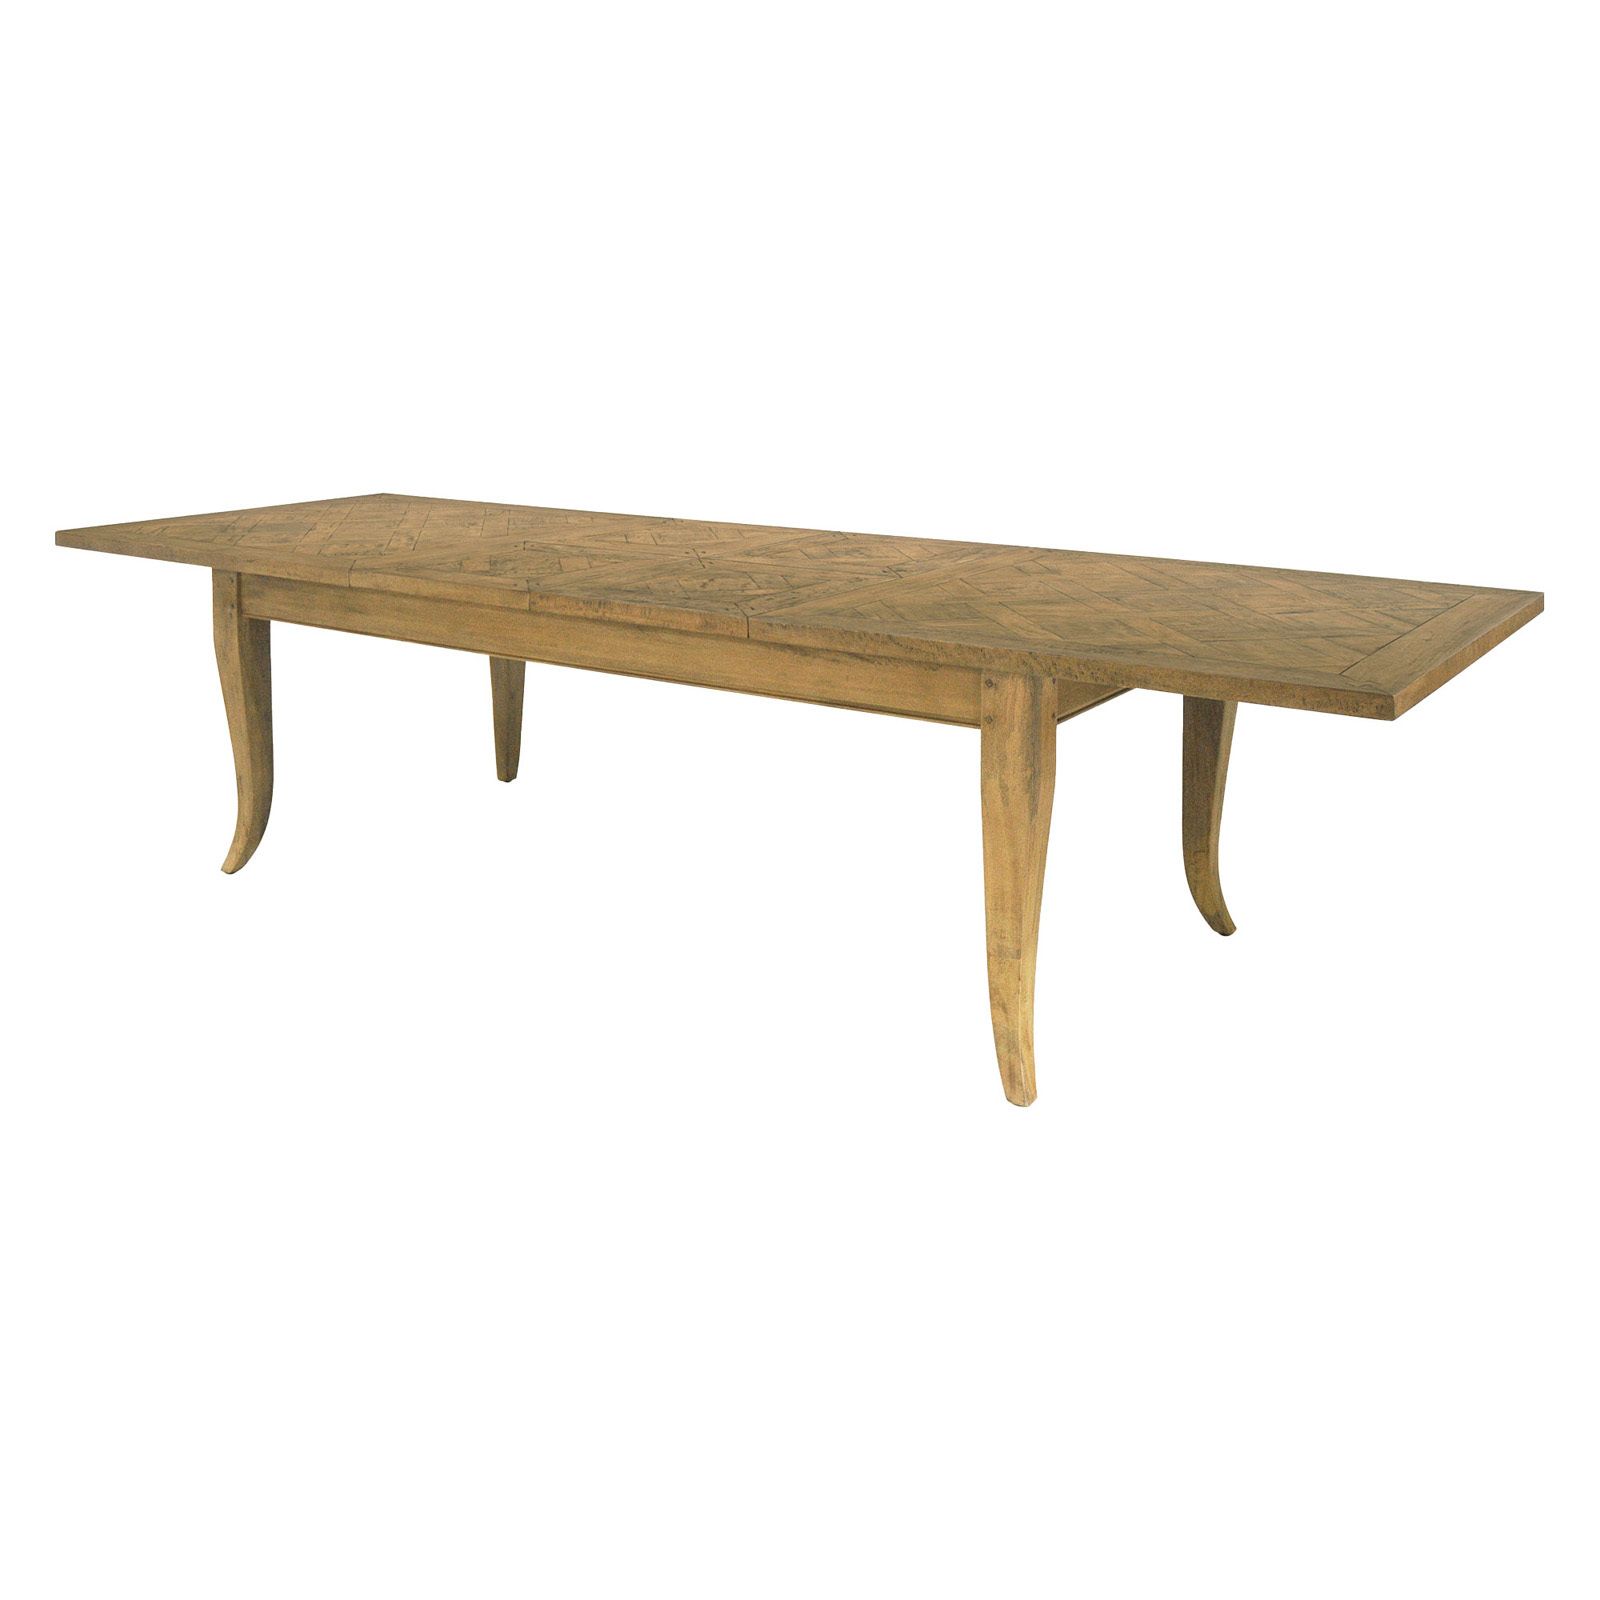 Temple & Webster For Well Known Reclaimed Fruitwood Outdoor Tables (View 10 of 15)